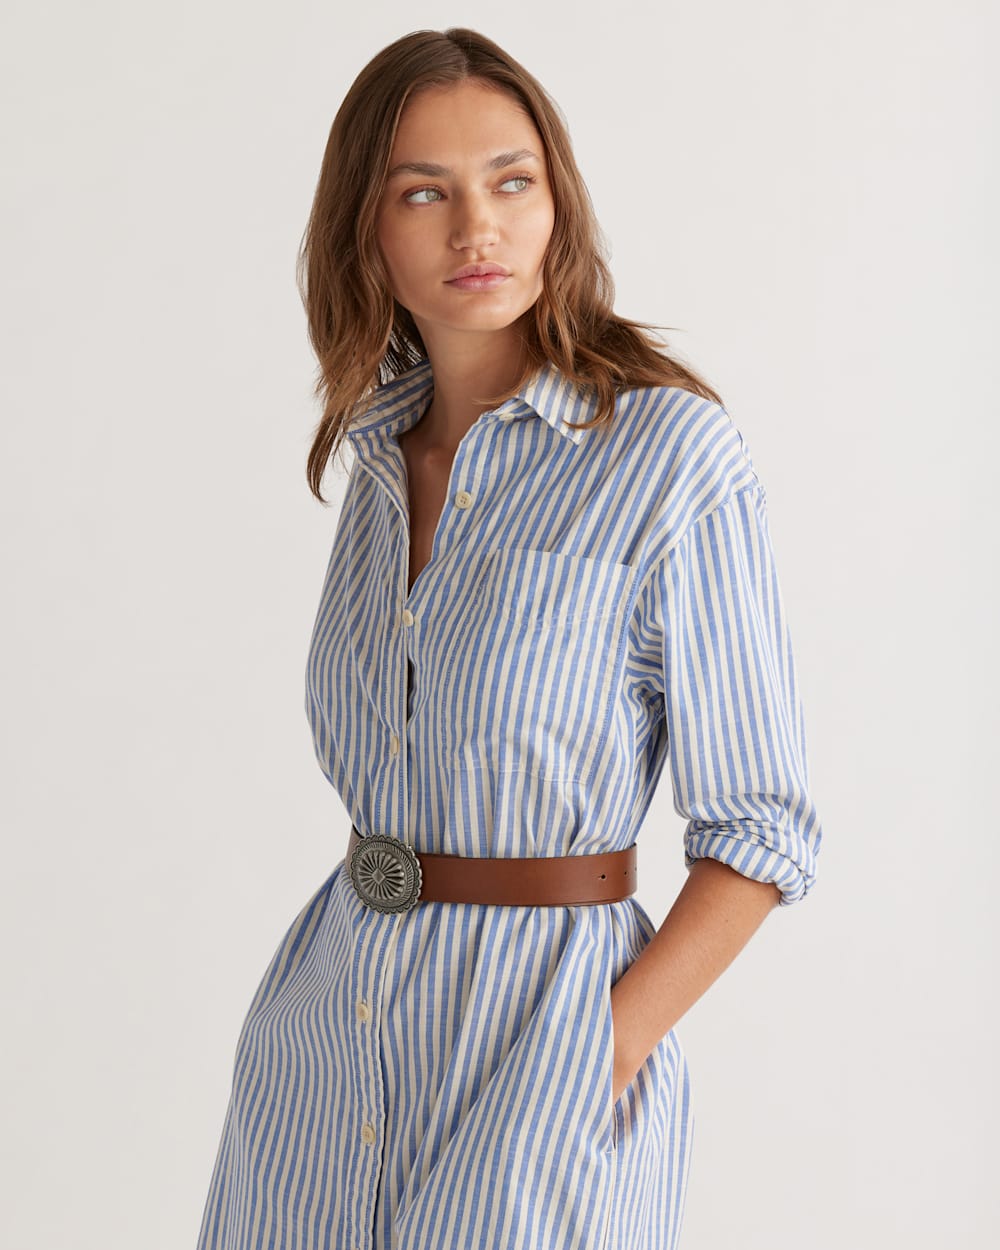 ALTERNATE VIEW OF WOMEN'S BRENTWOOD OVERSIZED SHIRTDRESS IN BLUE/IVORY STRIPE image number 4